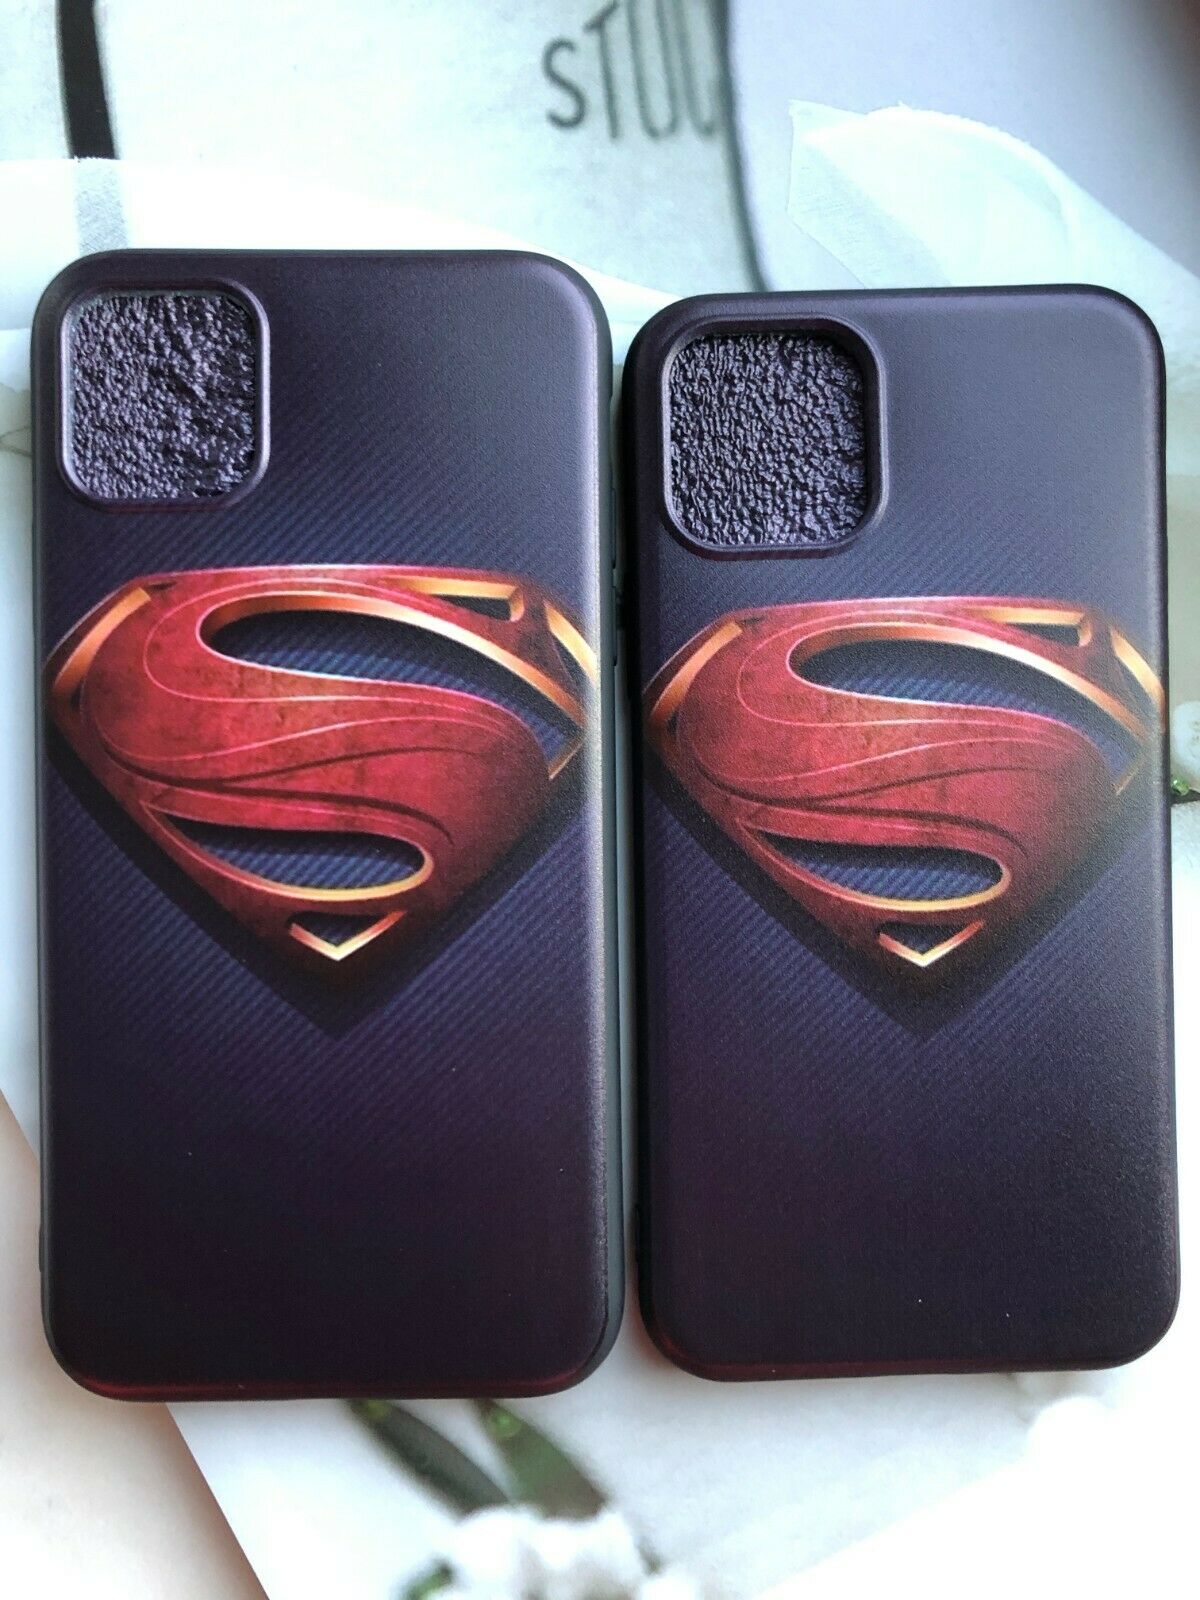 Buy More Save More+Free case+Free Ship Marvel Super Hero iPhone Case 11,11 Pro realdrummer215 iPhone 11 Superman 